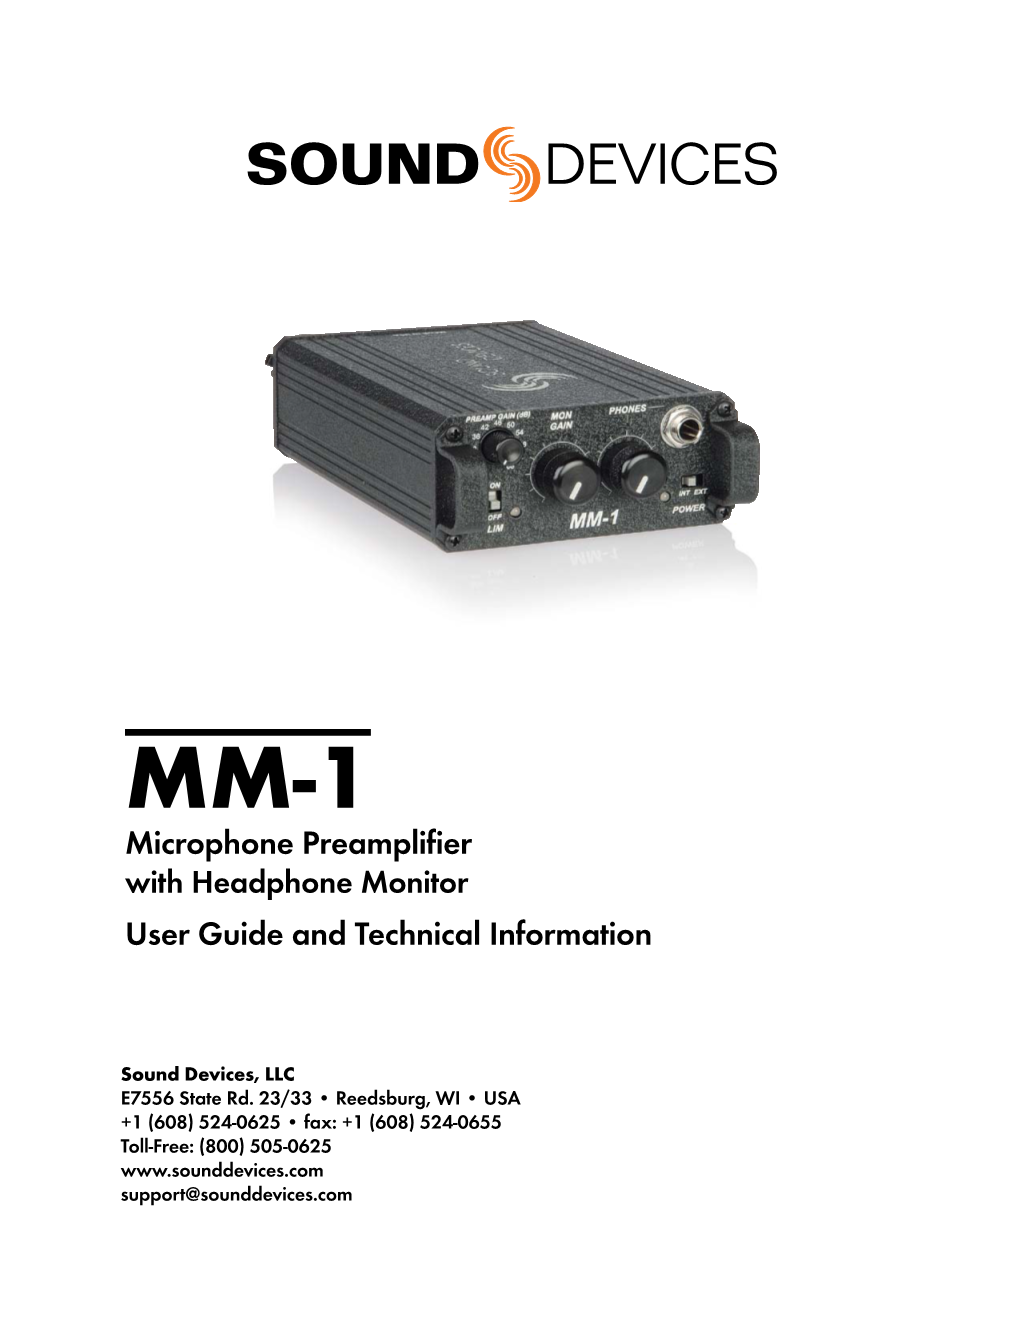 Sound Devices MM-1 Combines a High-Performance Microphone Preamplifier with a Flexible Headphone Monitor